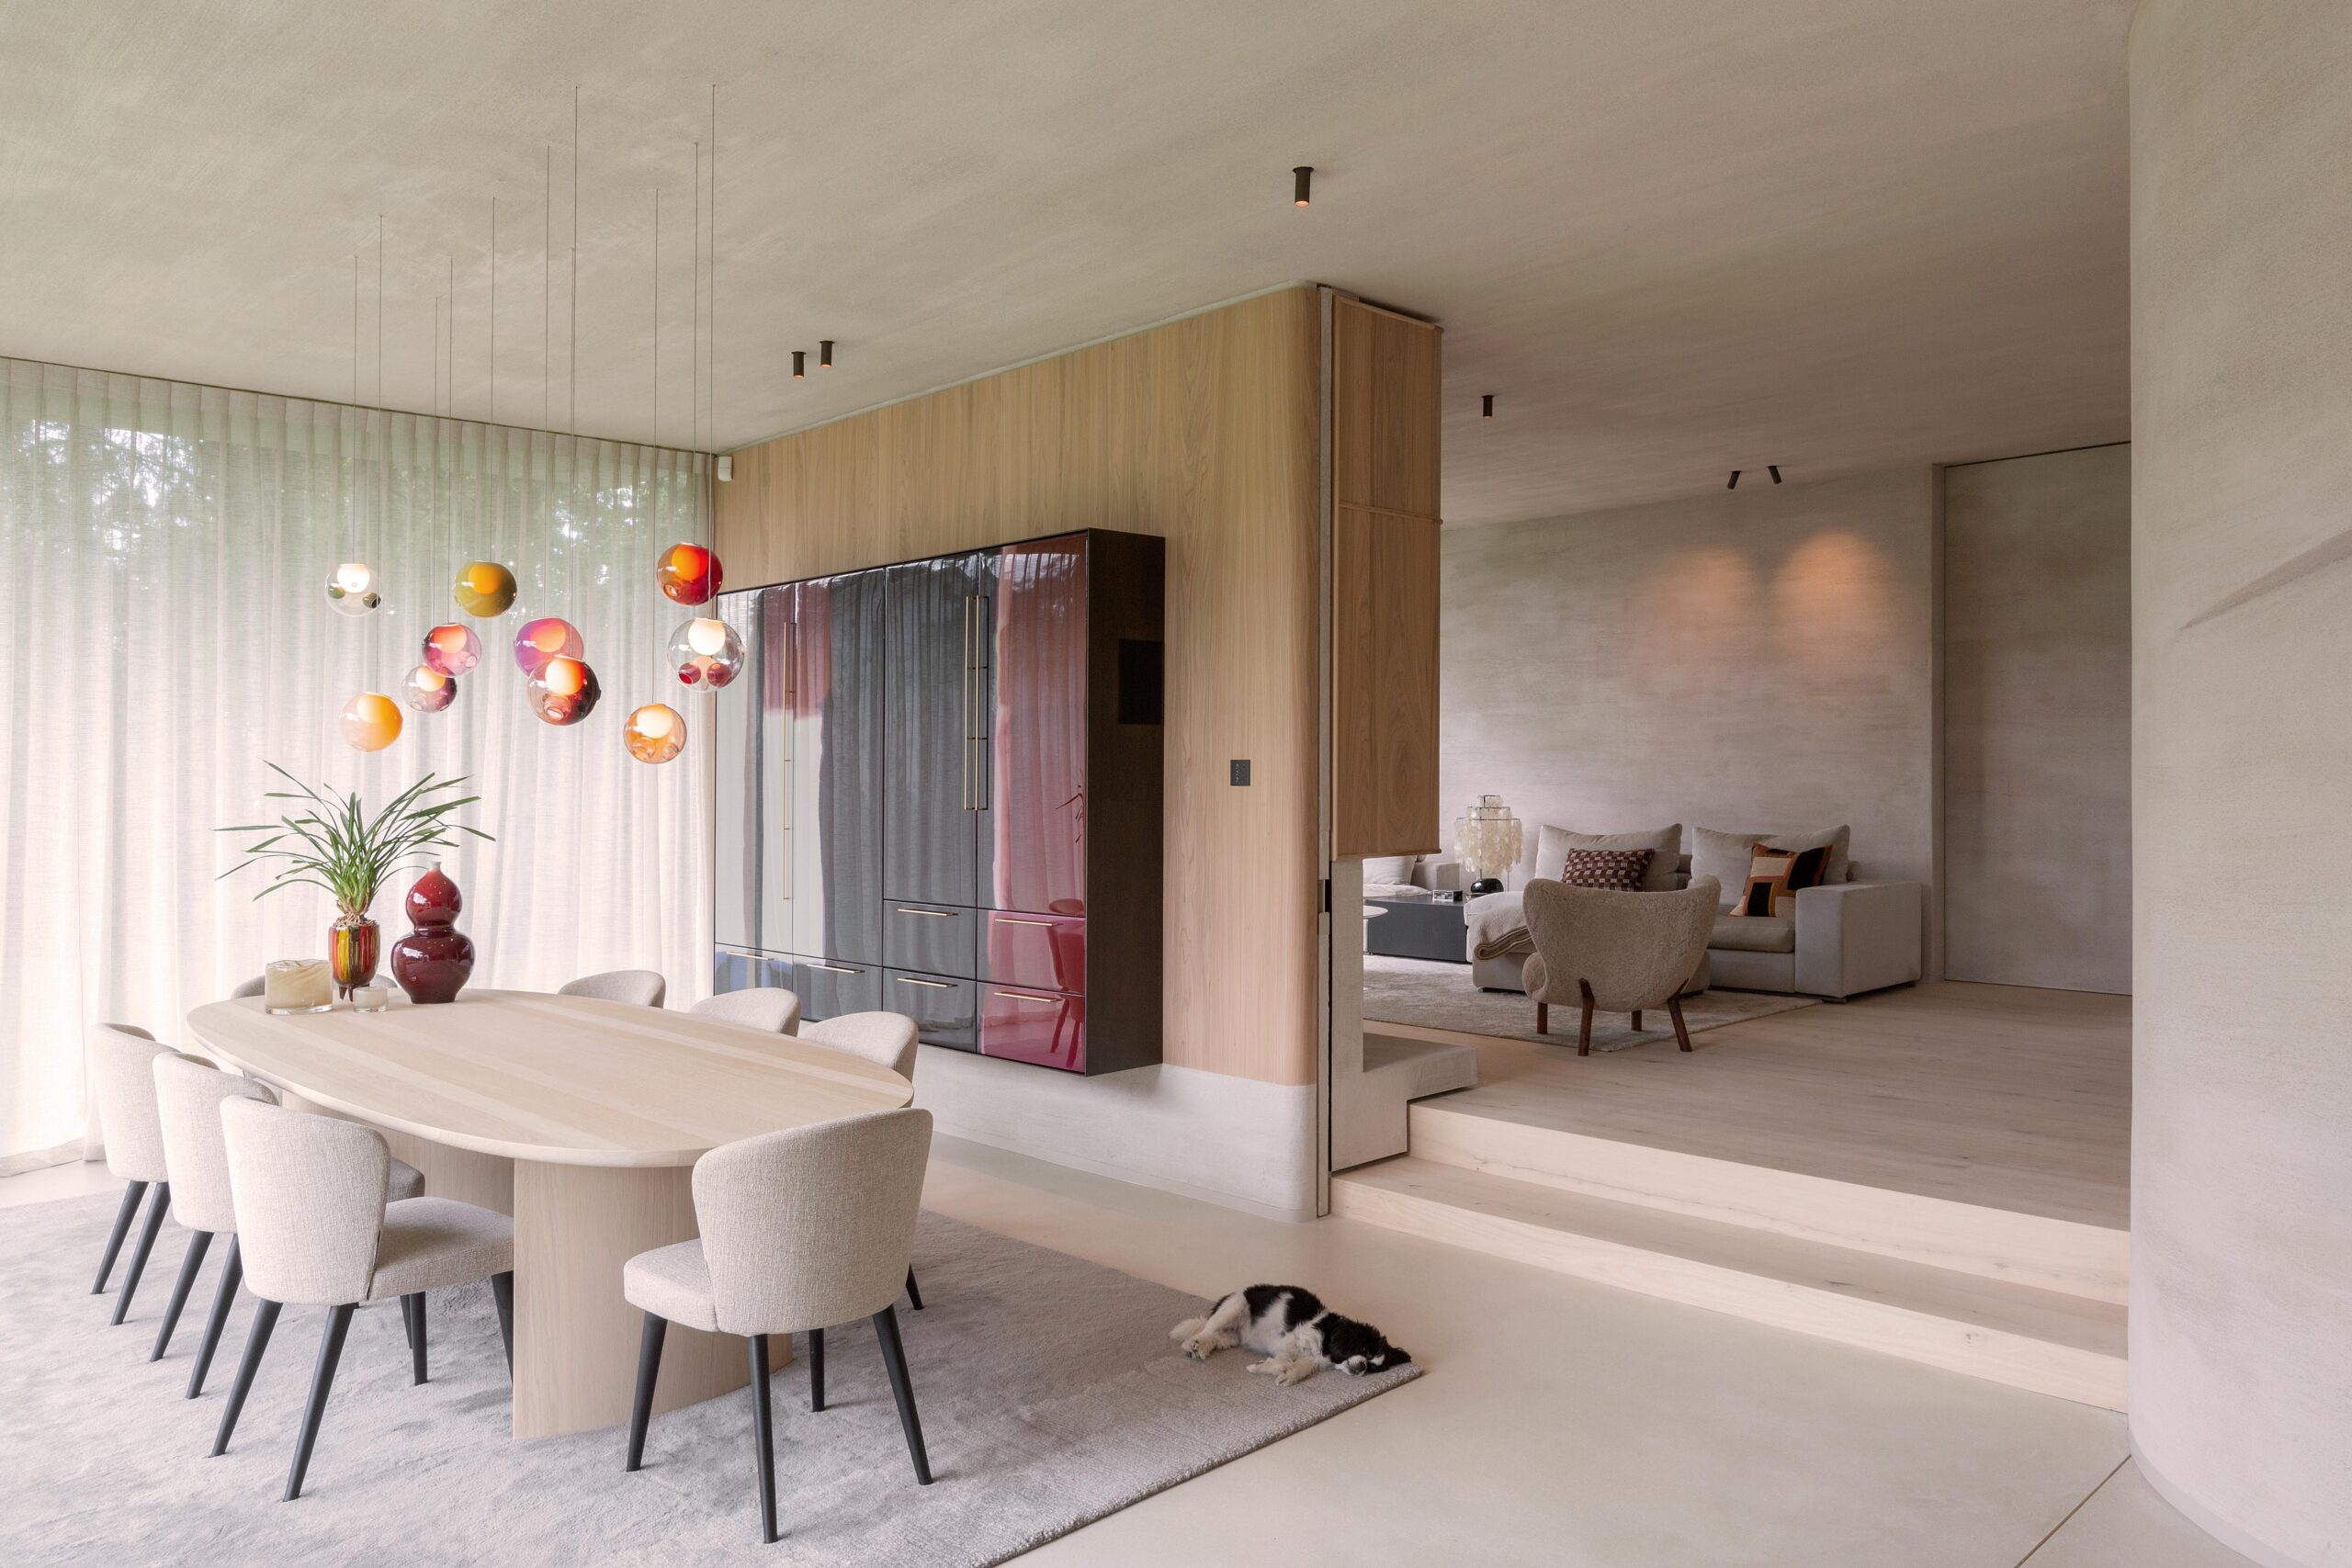 Elegant dining area with a wooden table, upholstered chairs, and colorful suspended glass pendant lights. The room seamlessly connects to a cozy living space with muted tones, and a small dog rests on the rug.